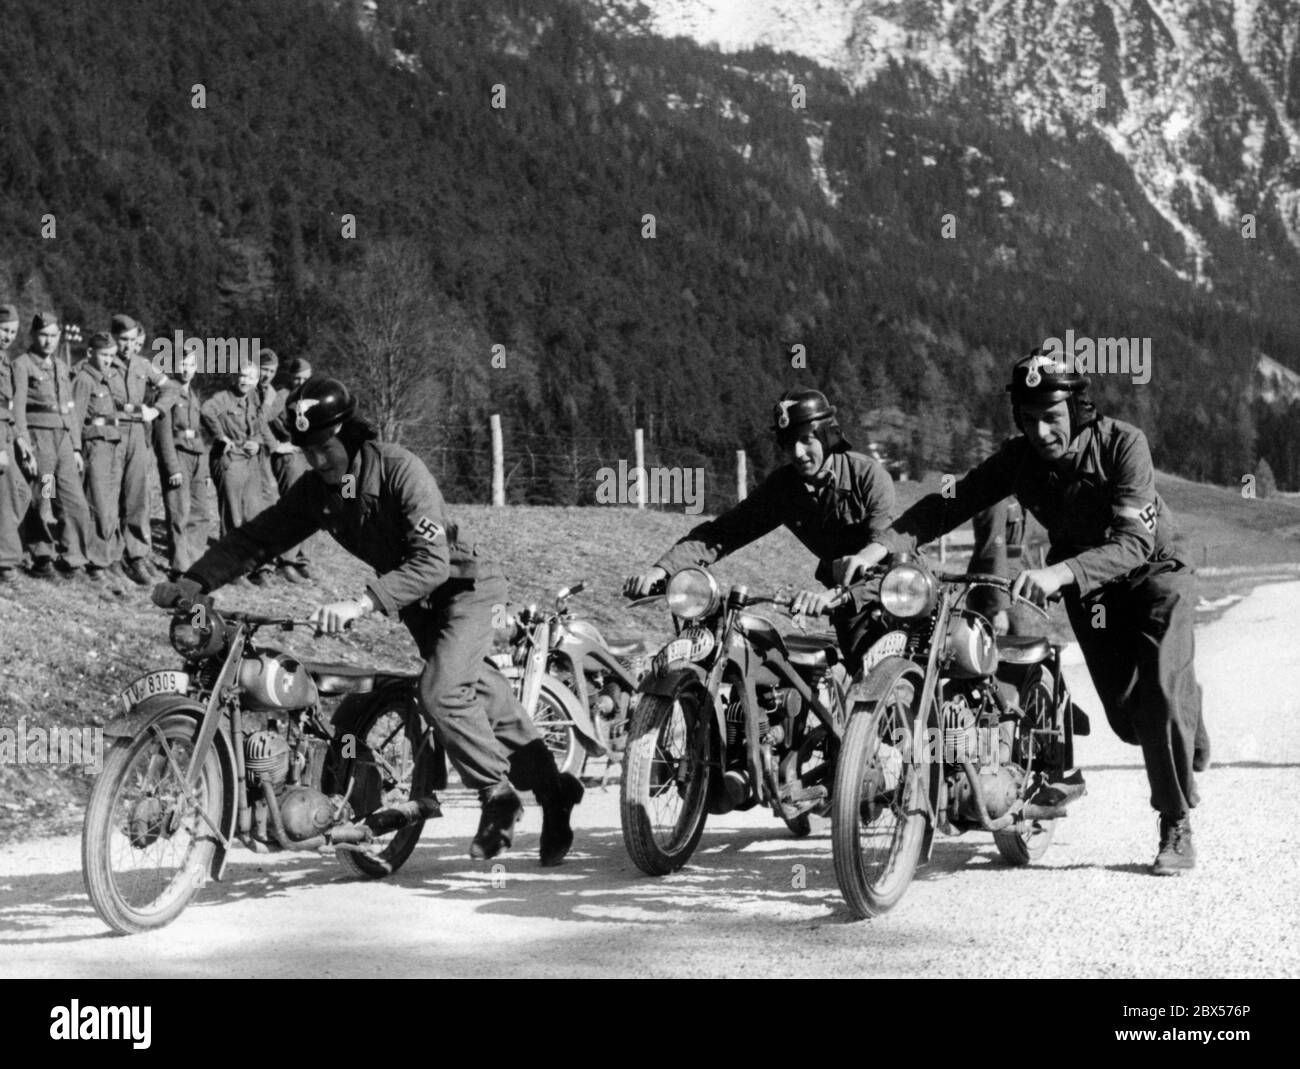 Three members of the Motor Hitler Youth push their motorcycles on a country road for a practice ride. On the left there is a group watching them. In the background are mountains. The motorbike in the middle is a Puch 200. On the left and right are Puch 125 T motorcycles. Stock Photo